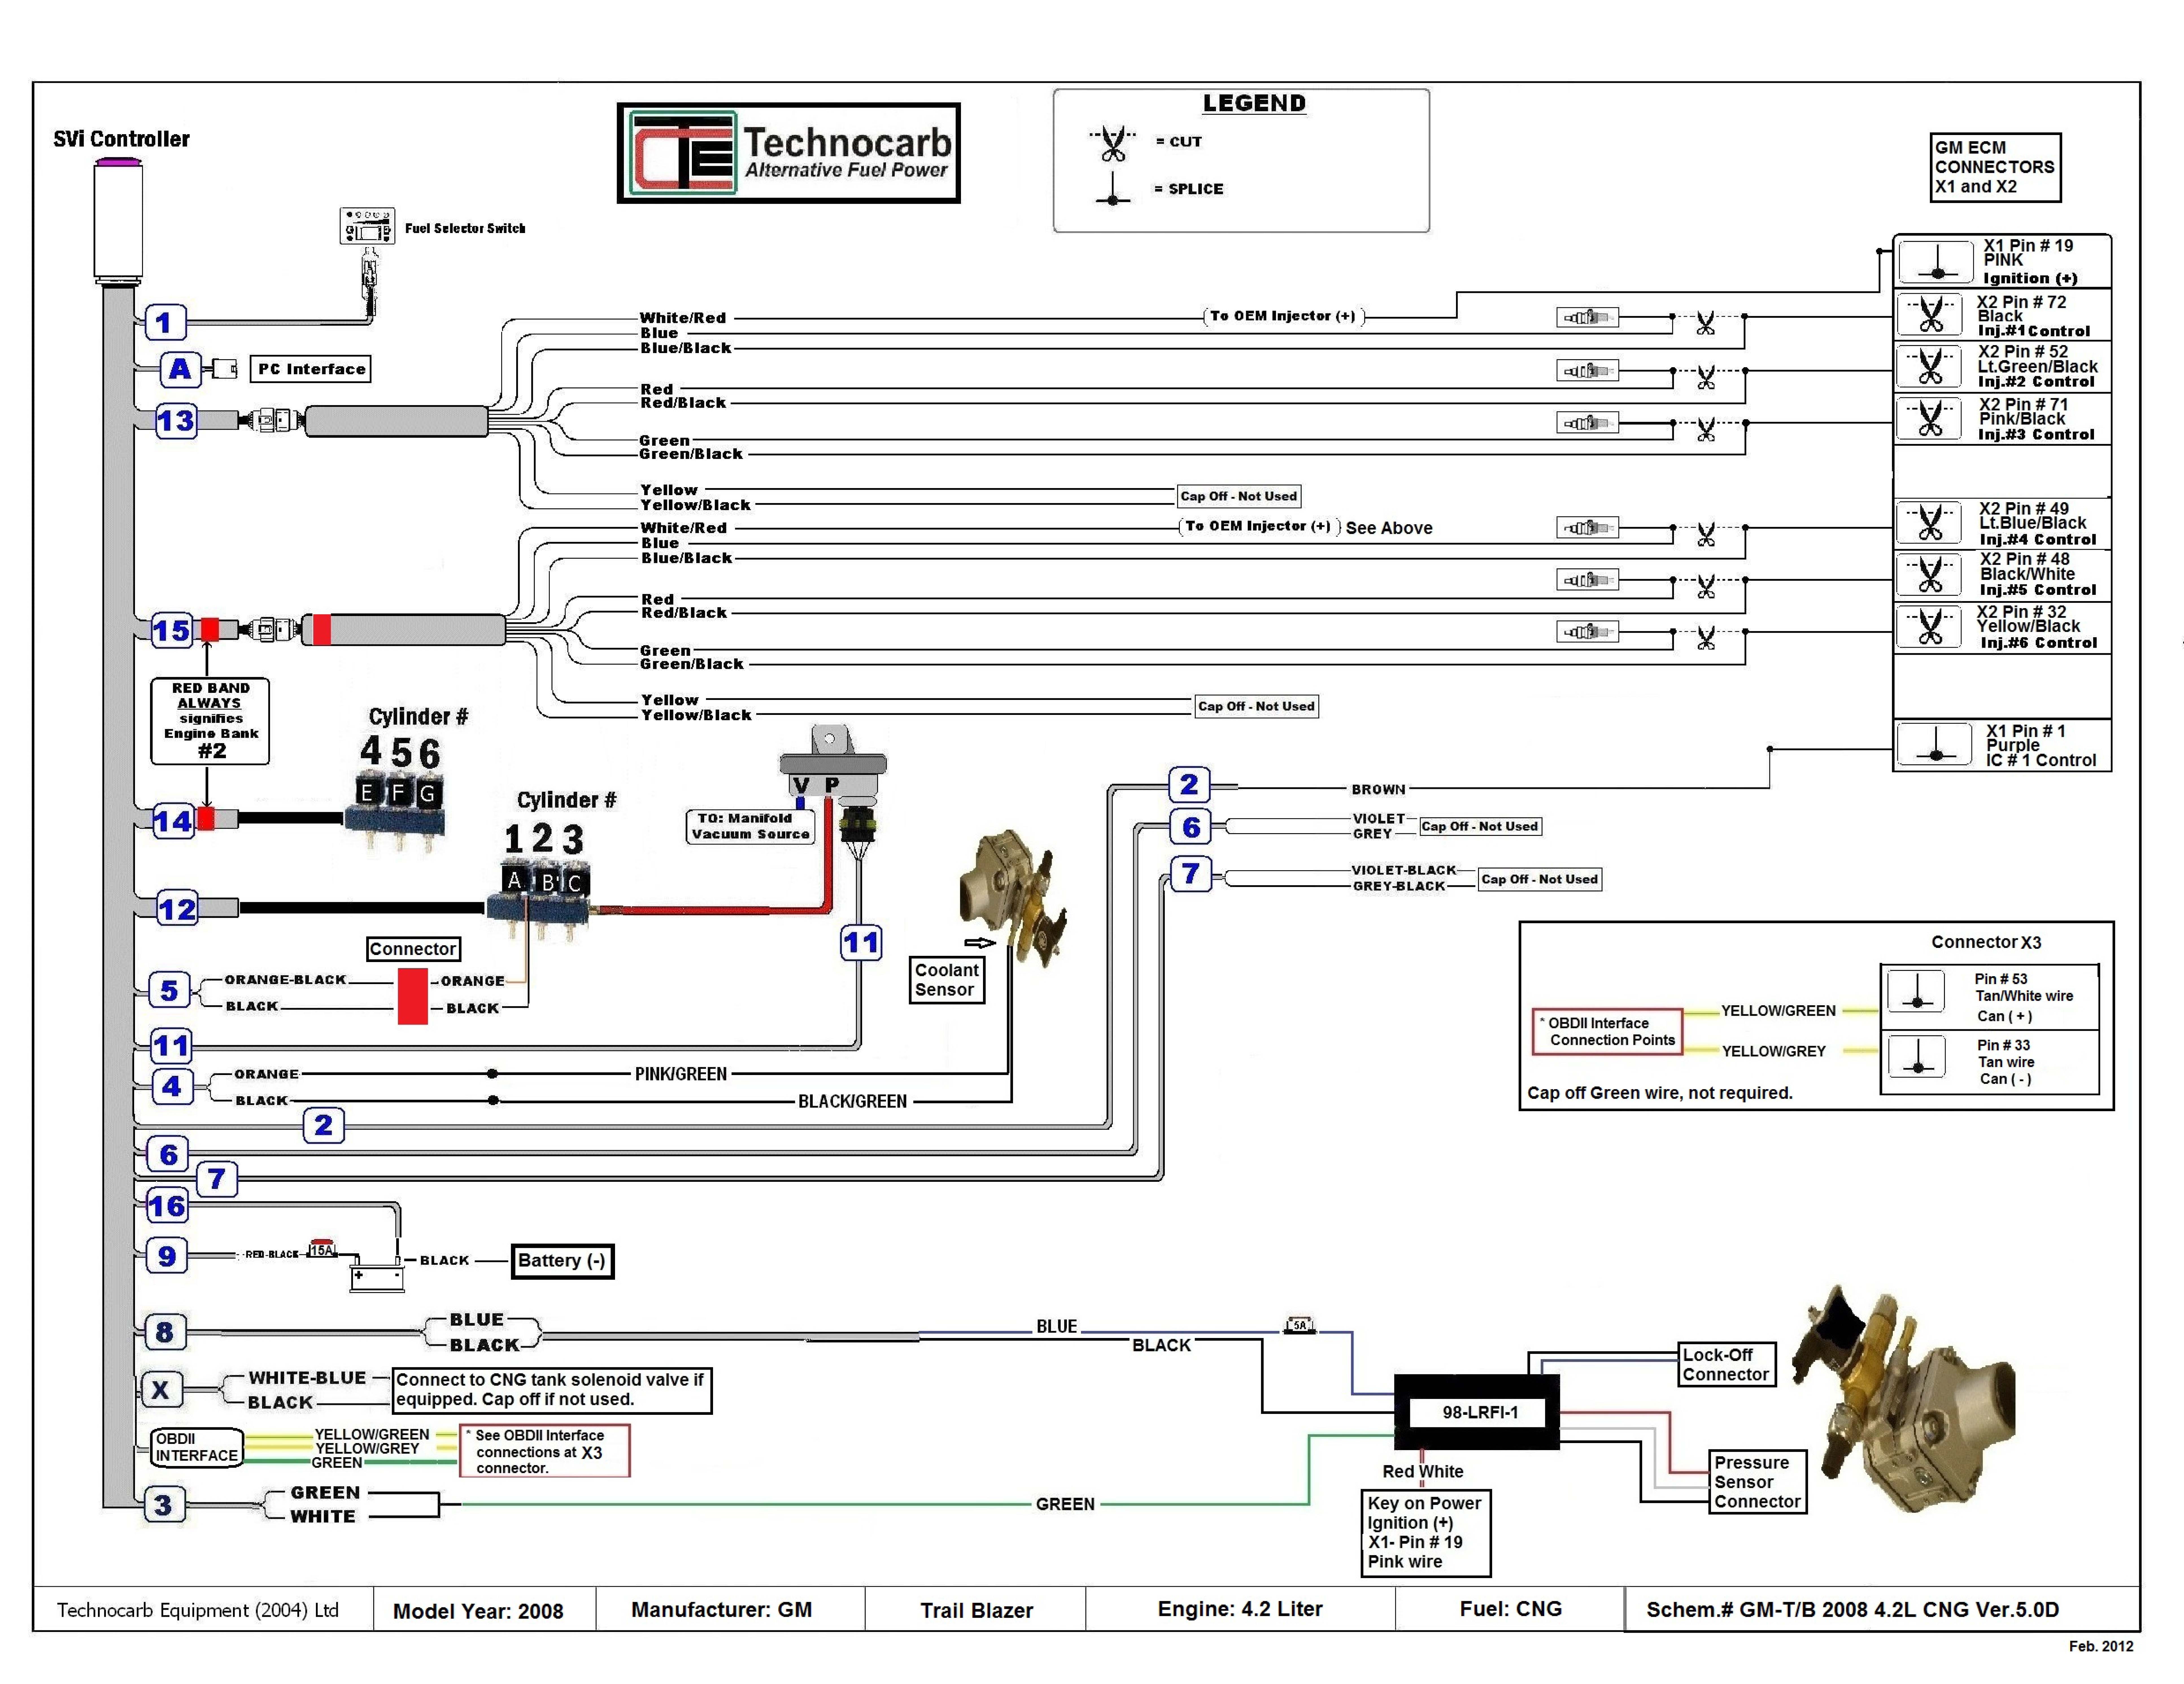 Diagram Of Fuel Injection System Fuel Injector Wiring Wiring Diagram Ponents Of Diagram Of Fuel Injection System